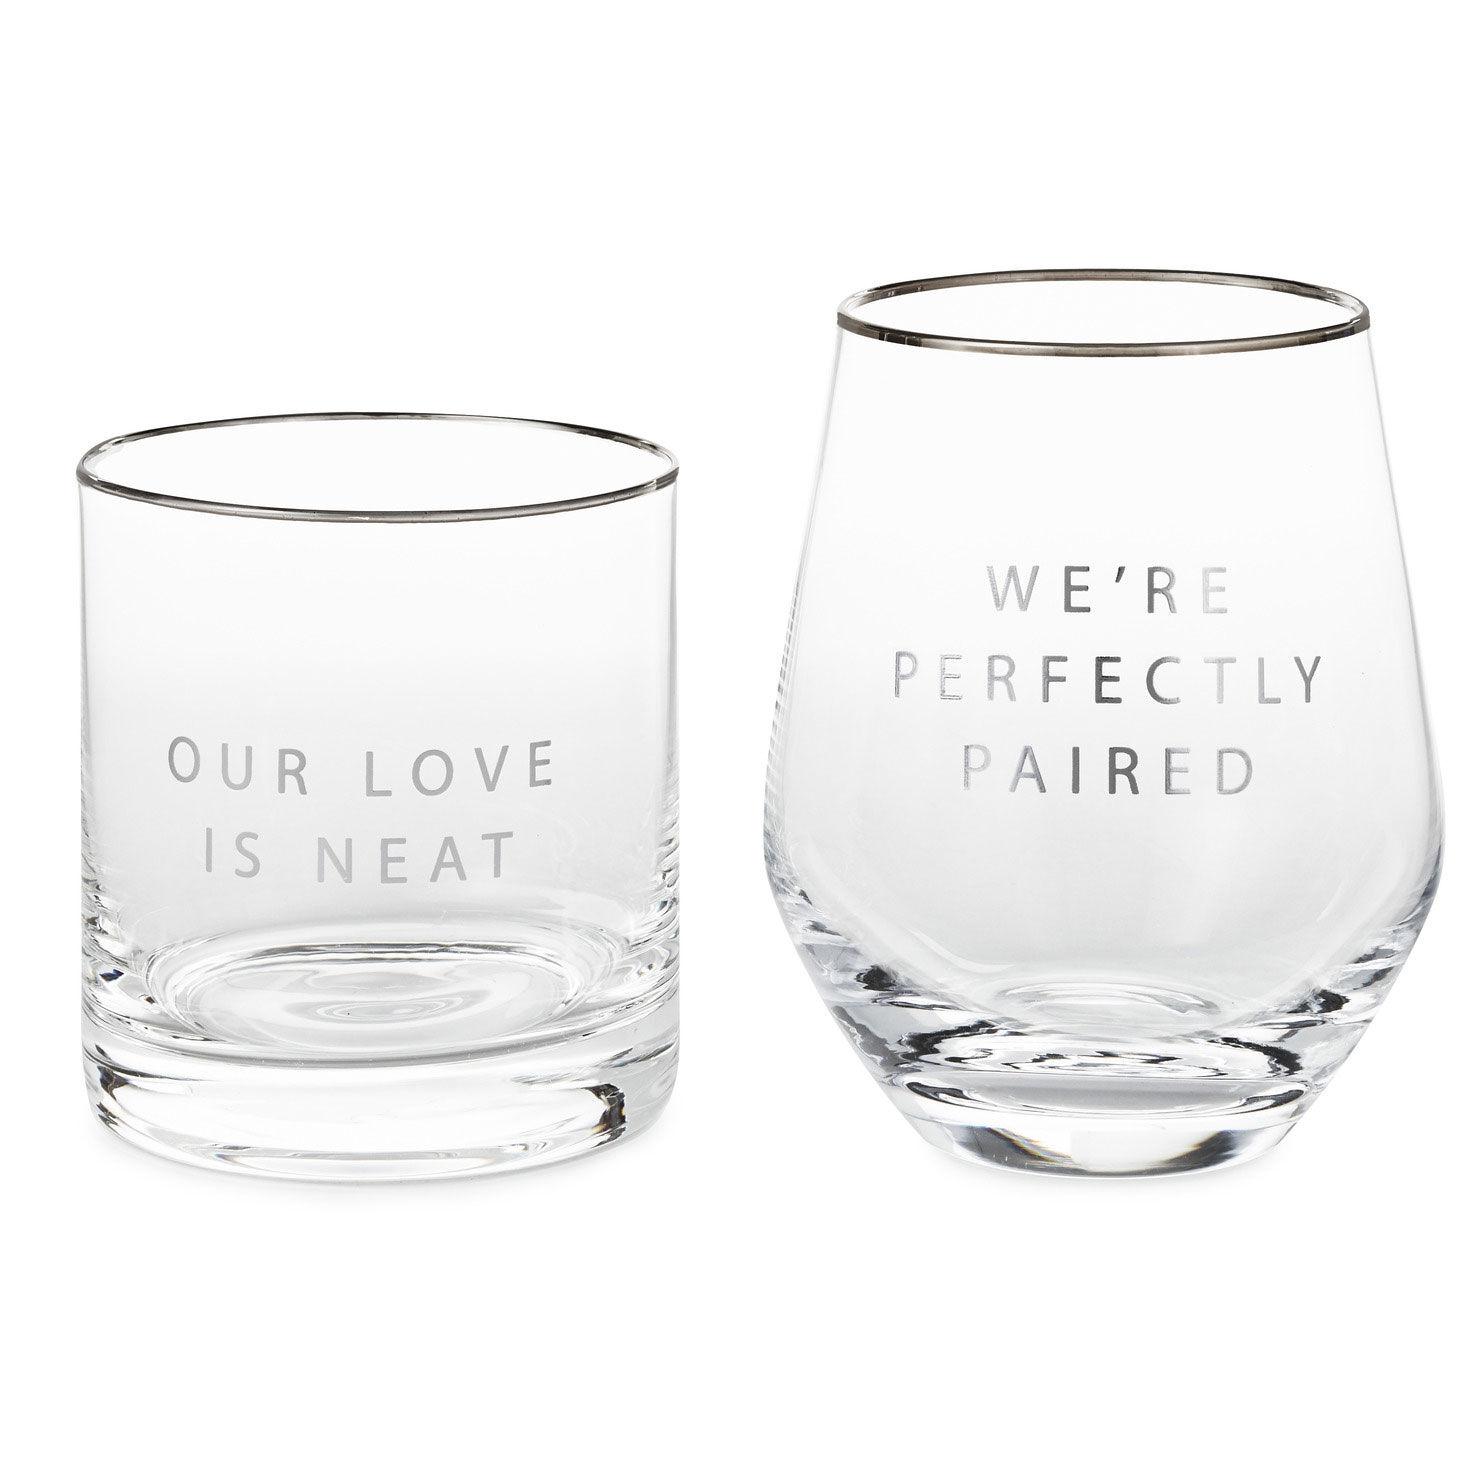 A Set of These Chic Stemless Wine Glasses Is Less Than $25